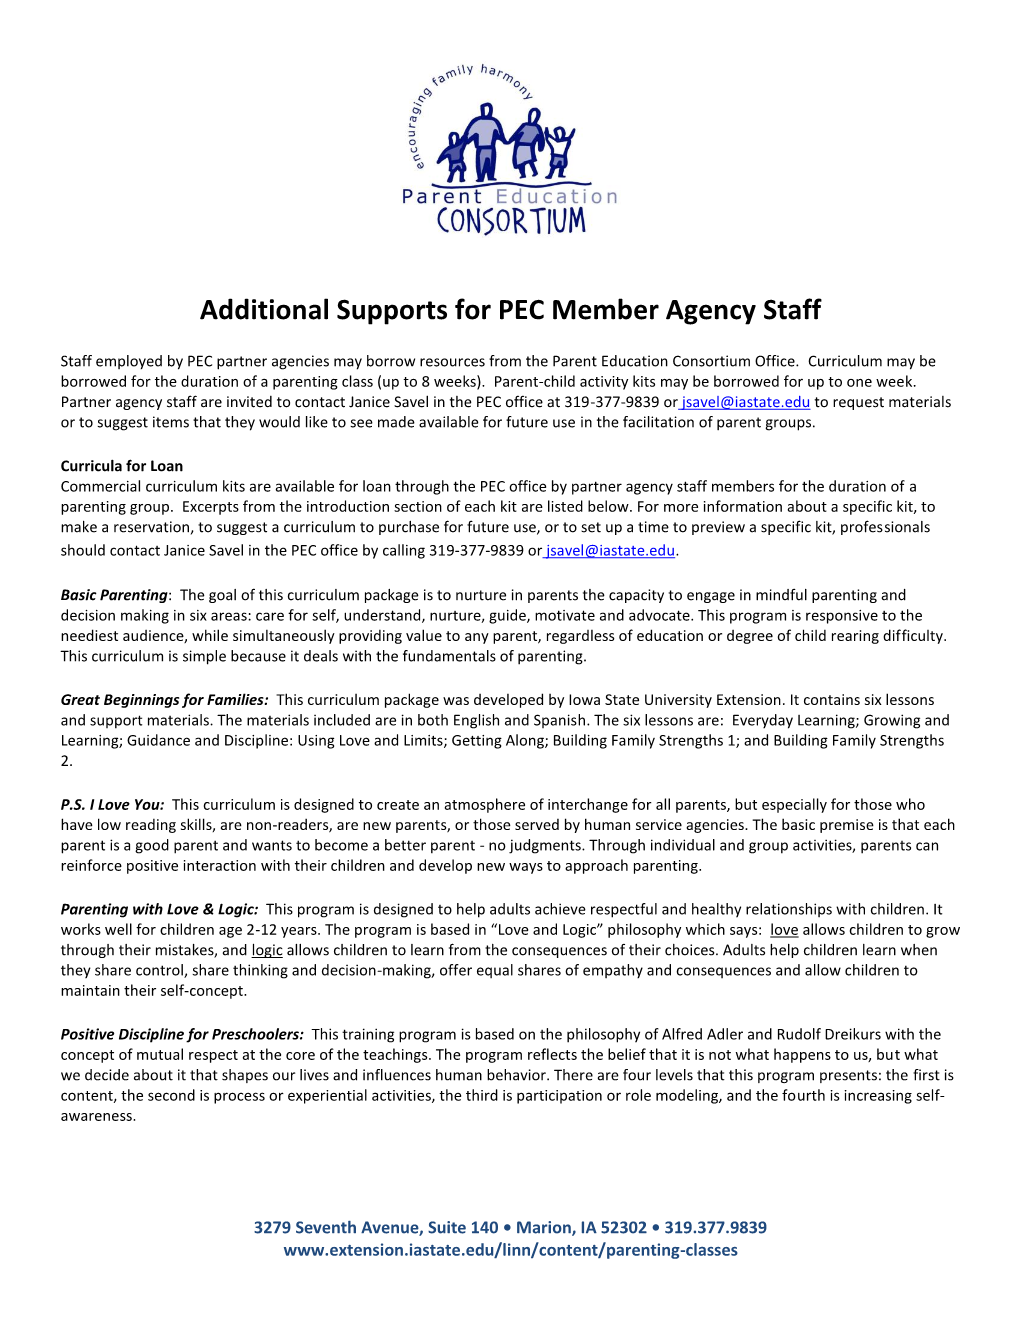 Additional Supports for PEC Member Agency Staff